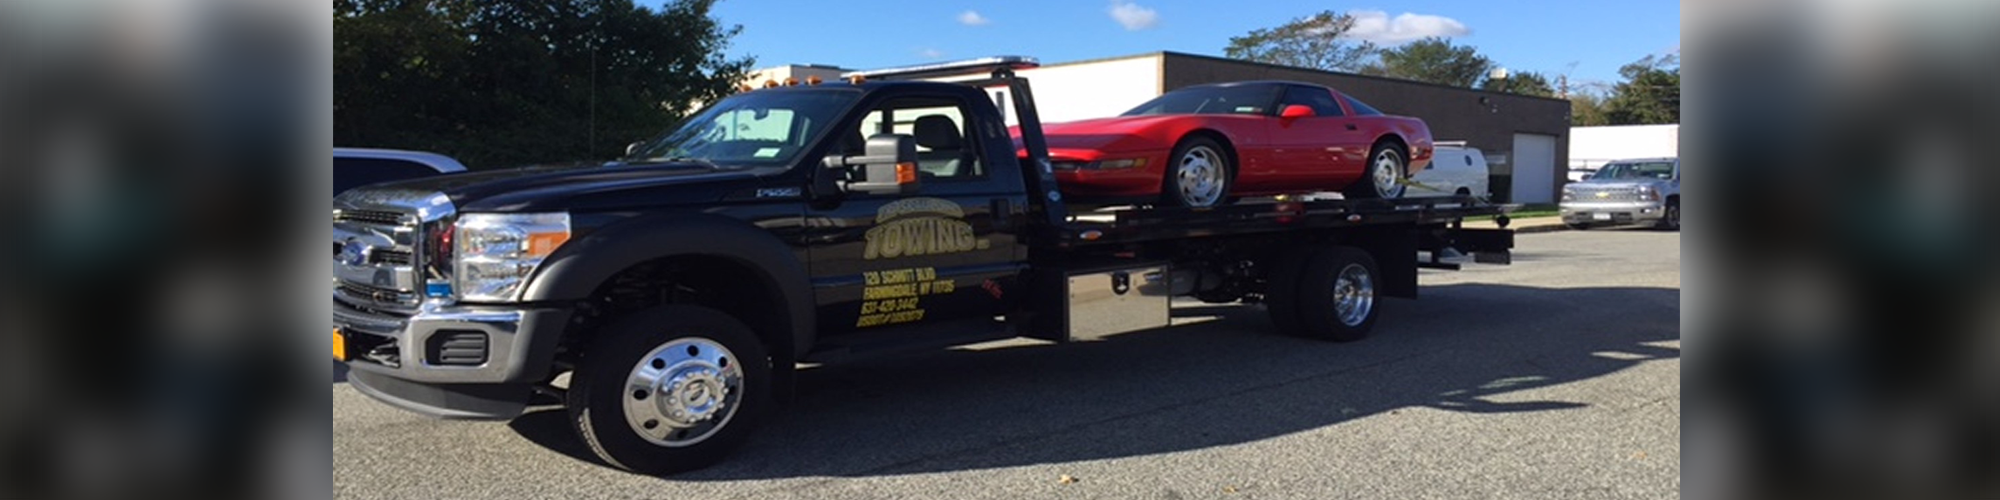 We provide automotive towing in Farmingdale, NY.